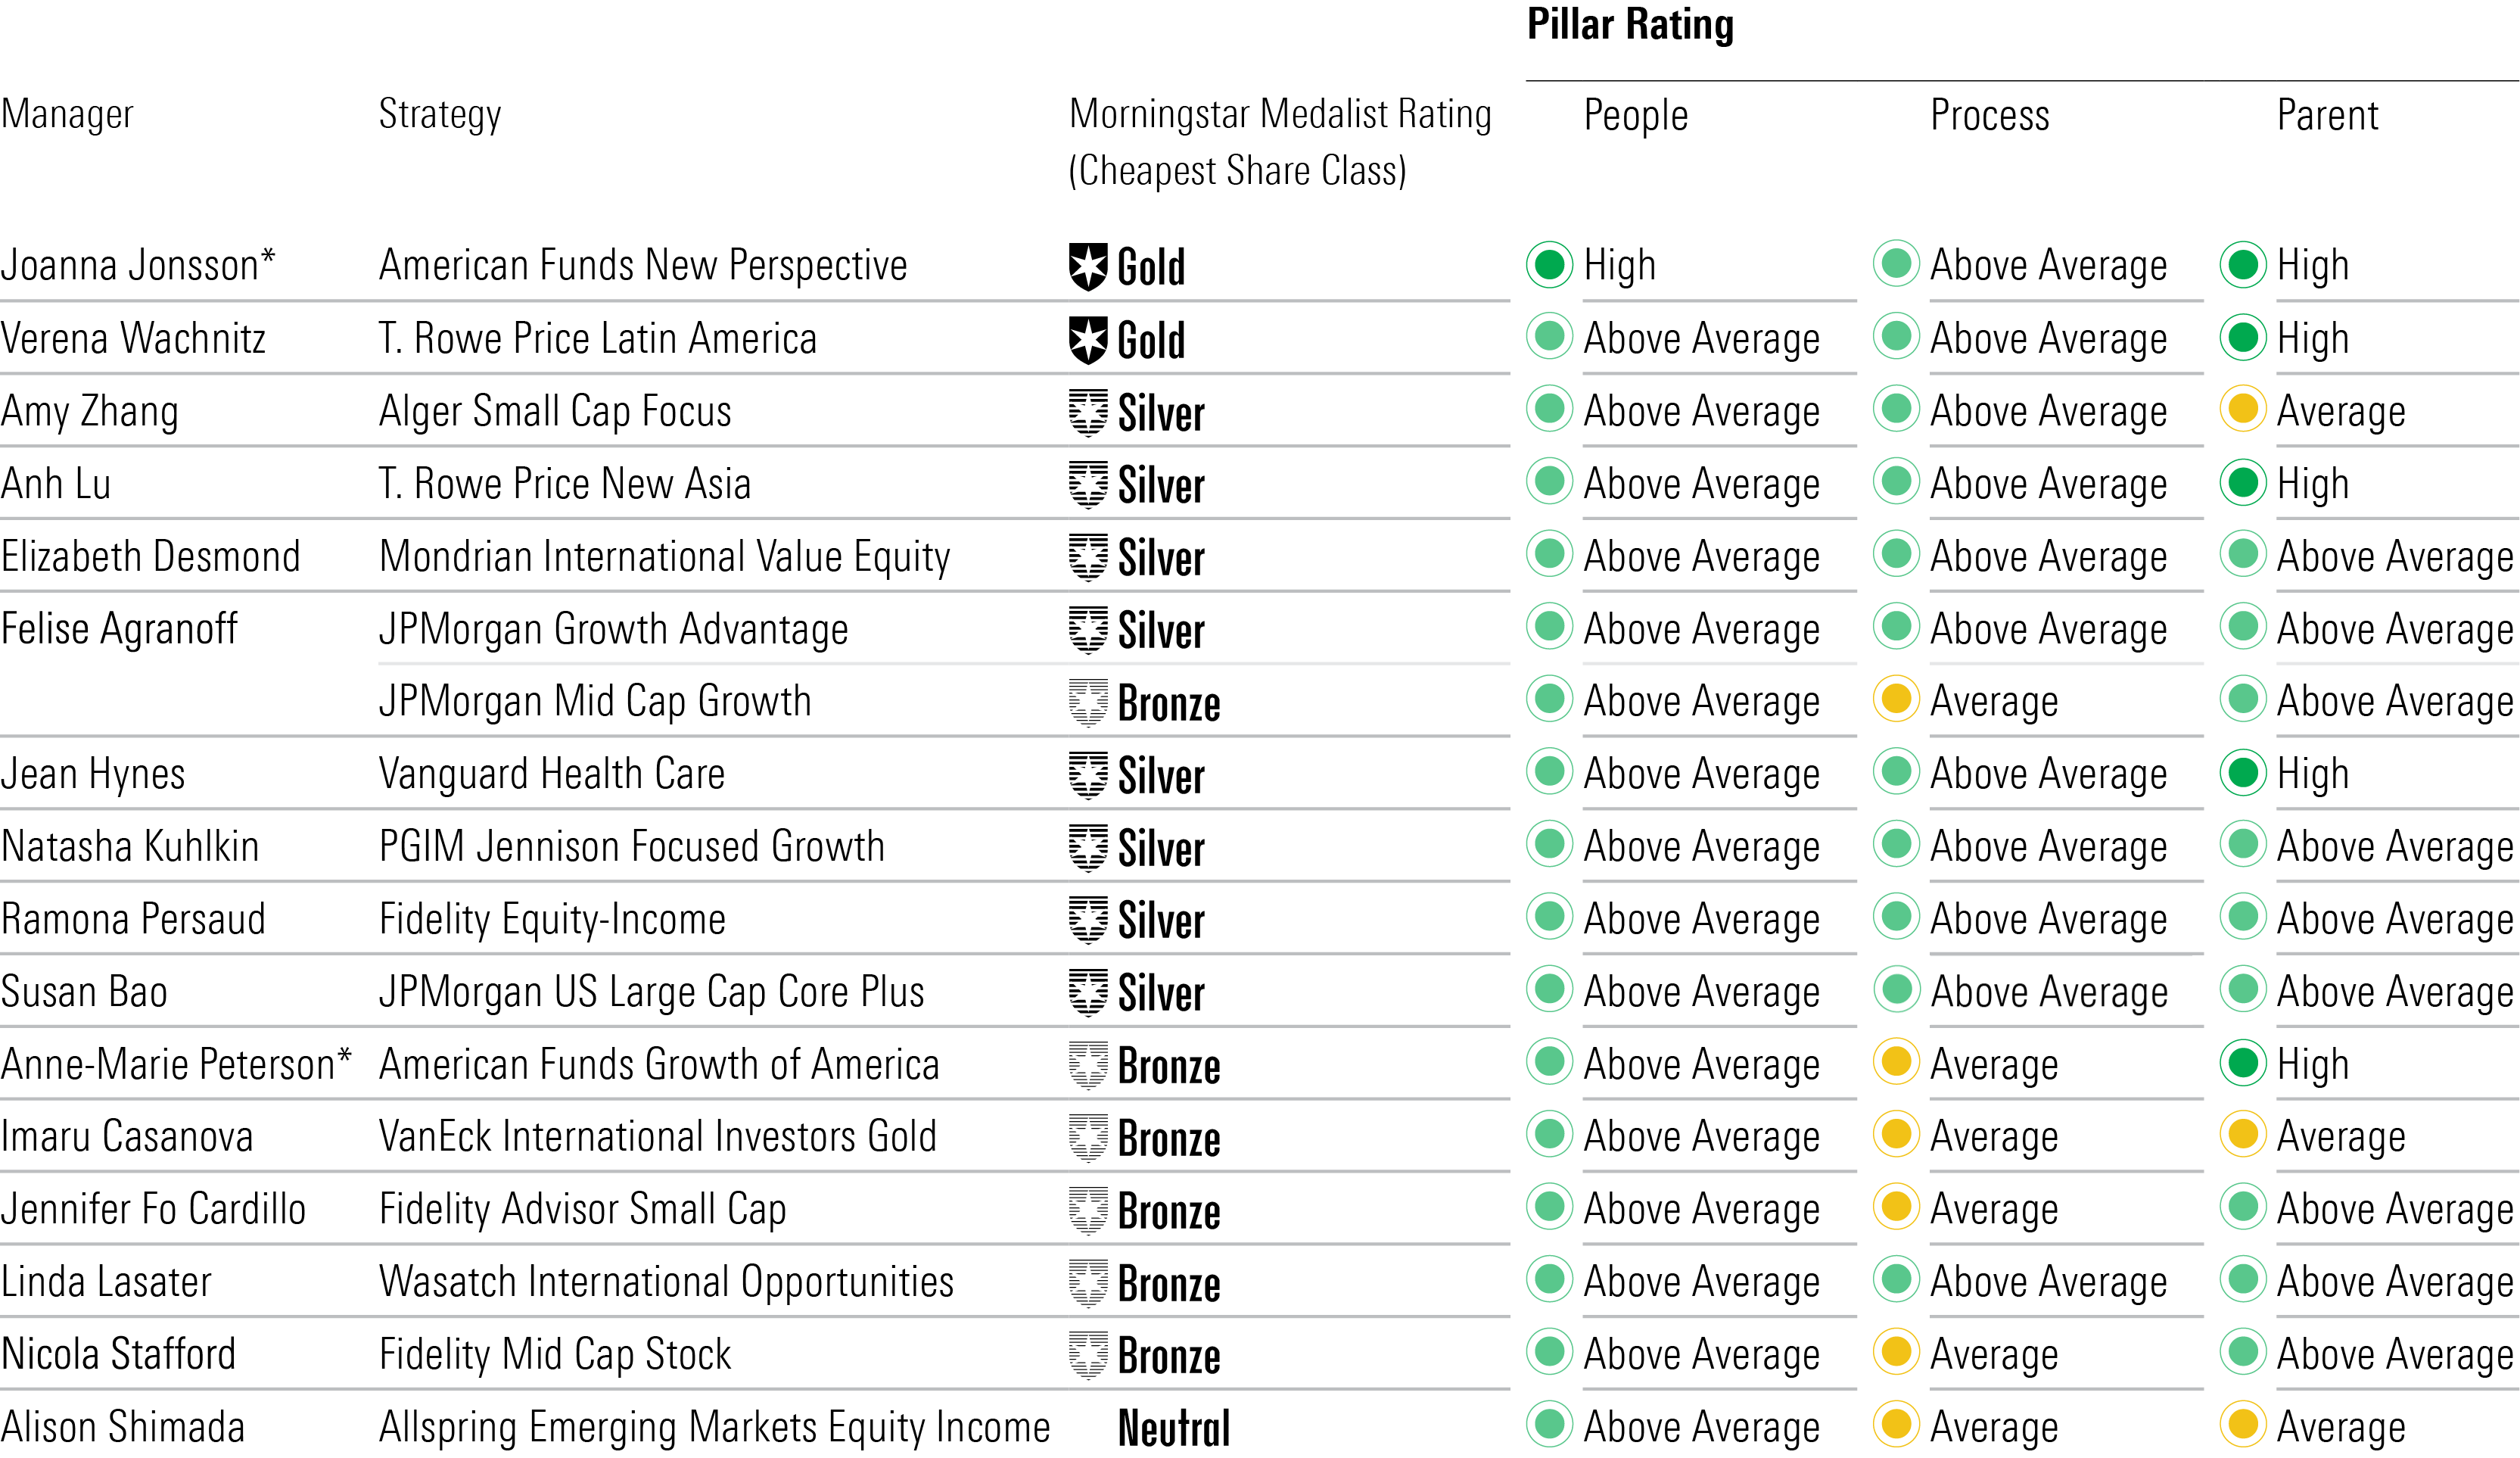 A table of the lead female equity managers that earn High or Above Average People ratings.